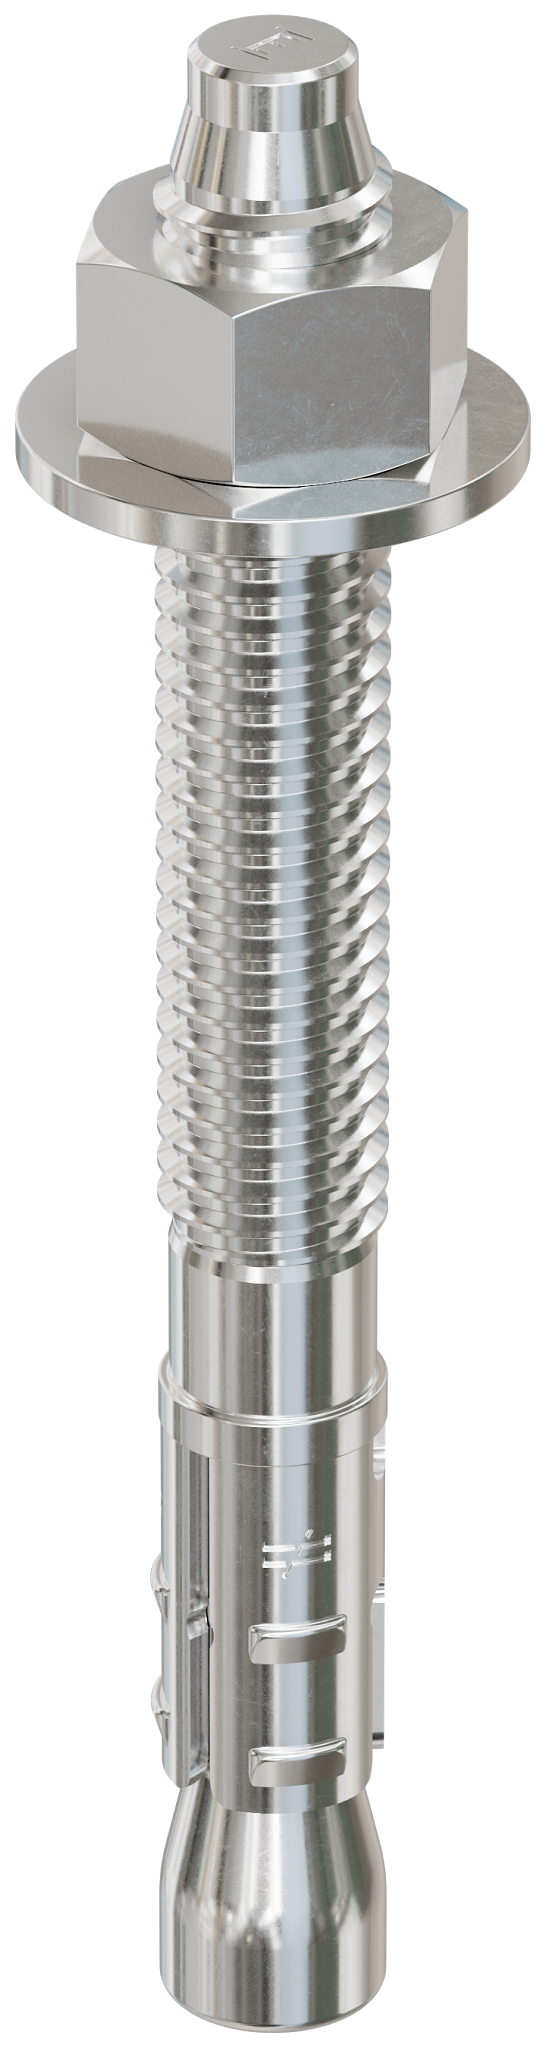 Simpson STB2-373124SS Strong-Bolt 2 — 3/8 in. x 3-1/2 in. Type 304 Stainless-Steel Wedge Anchor (50-Qty)